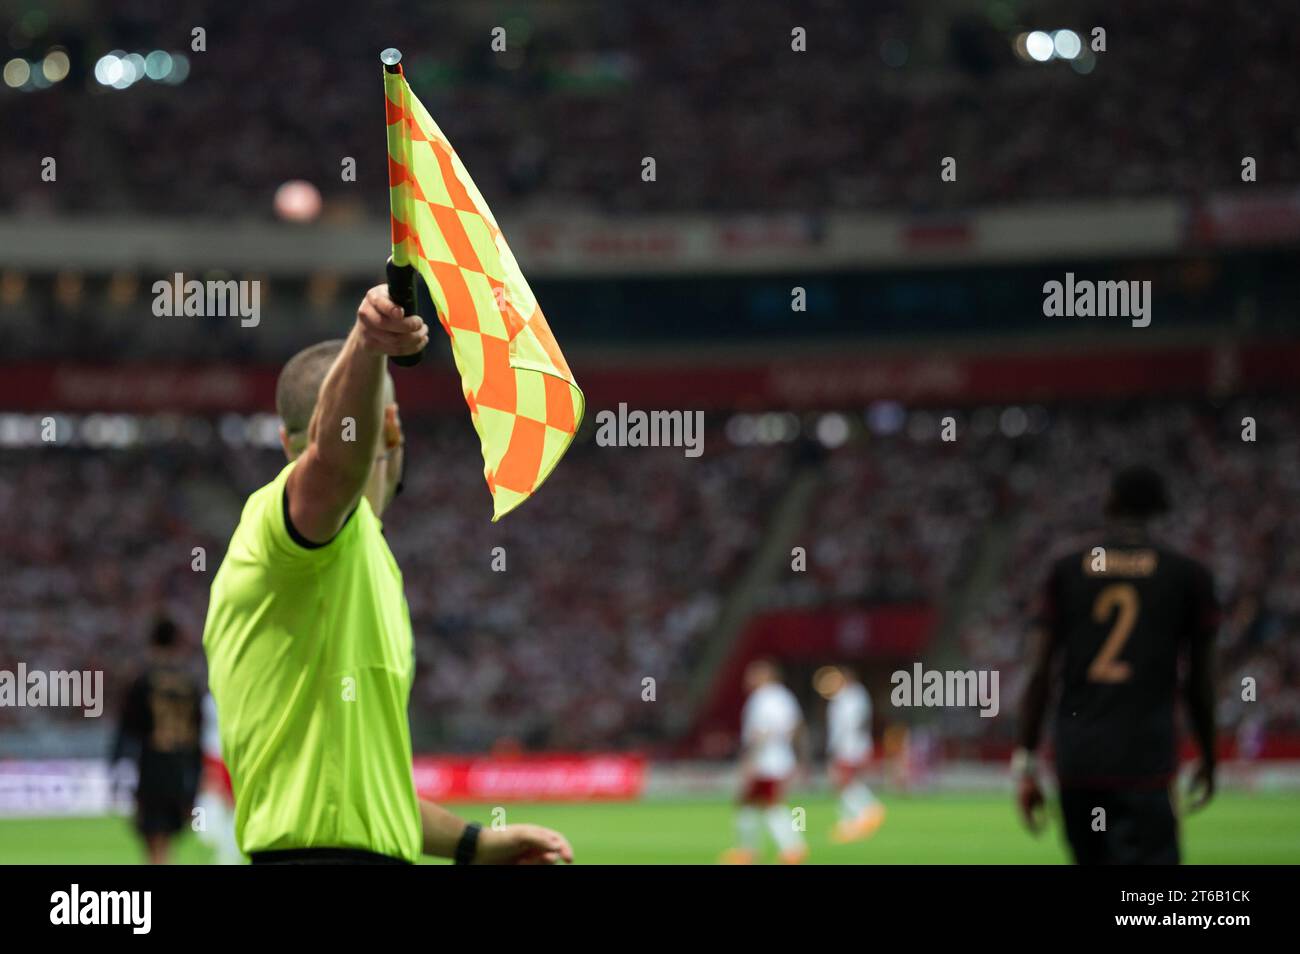 Raised flag of the sideline referee during football match. Stock Photo